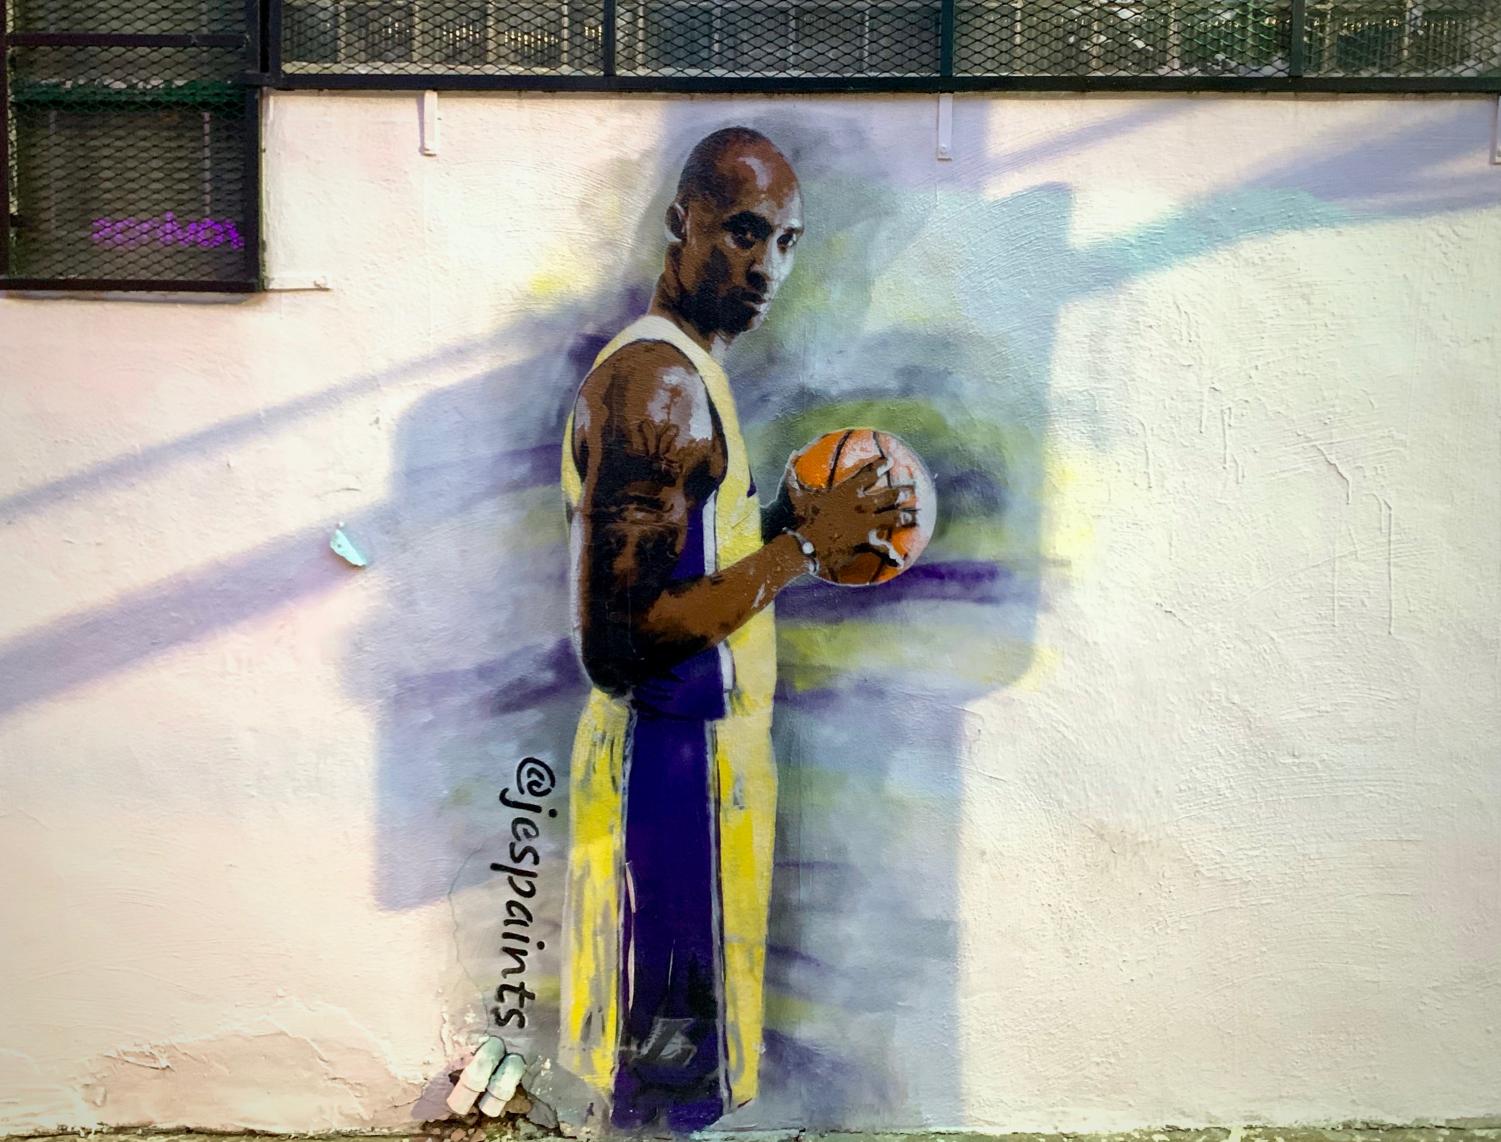 An Artist Replicated Kobe Bryant's Lakers Jersey Using Flowers